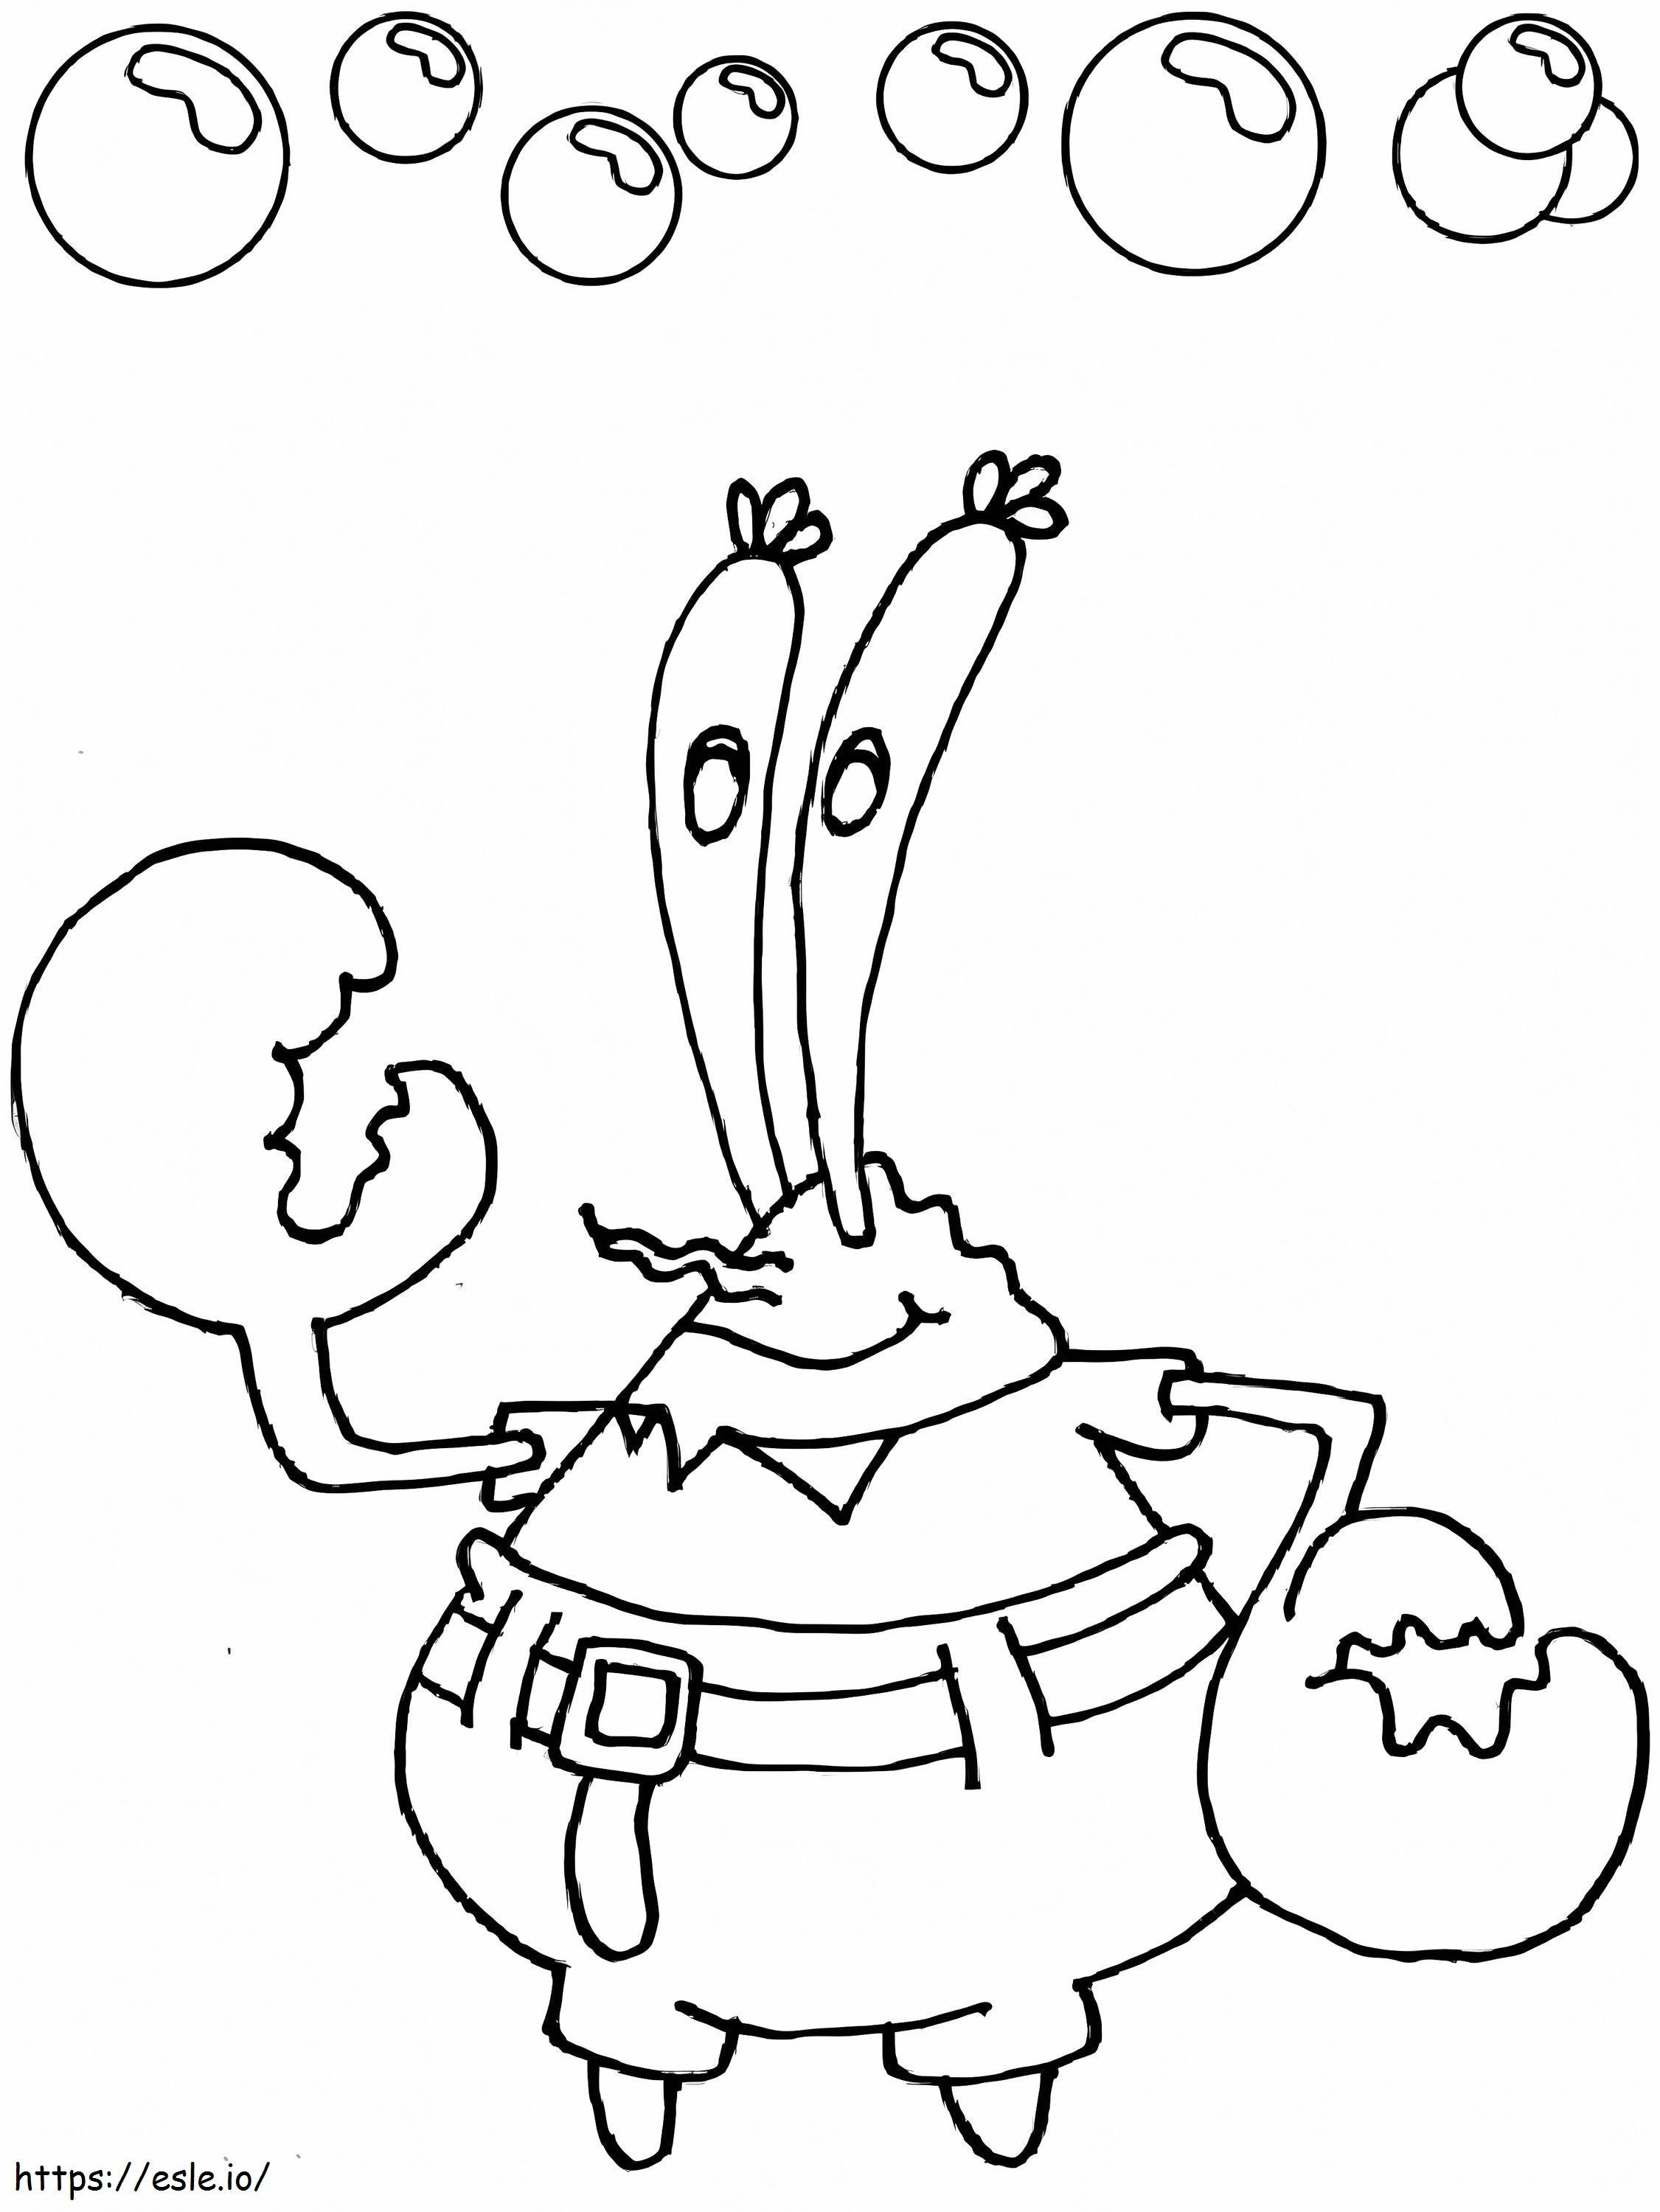 Mr. Krabs Basic coloring page